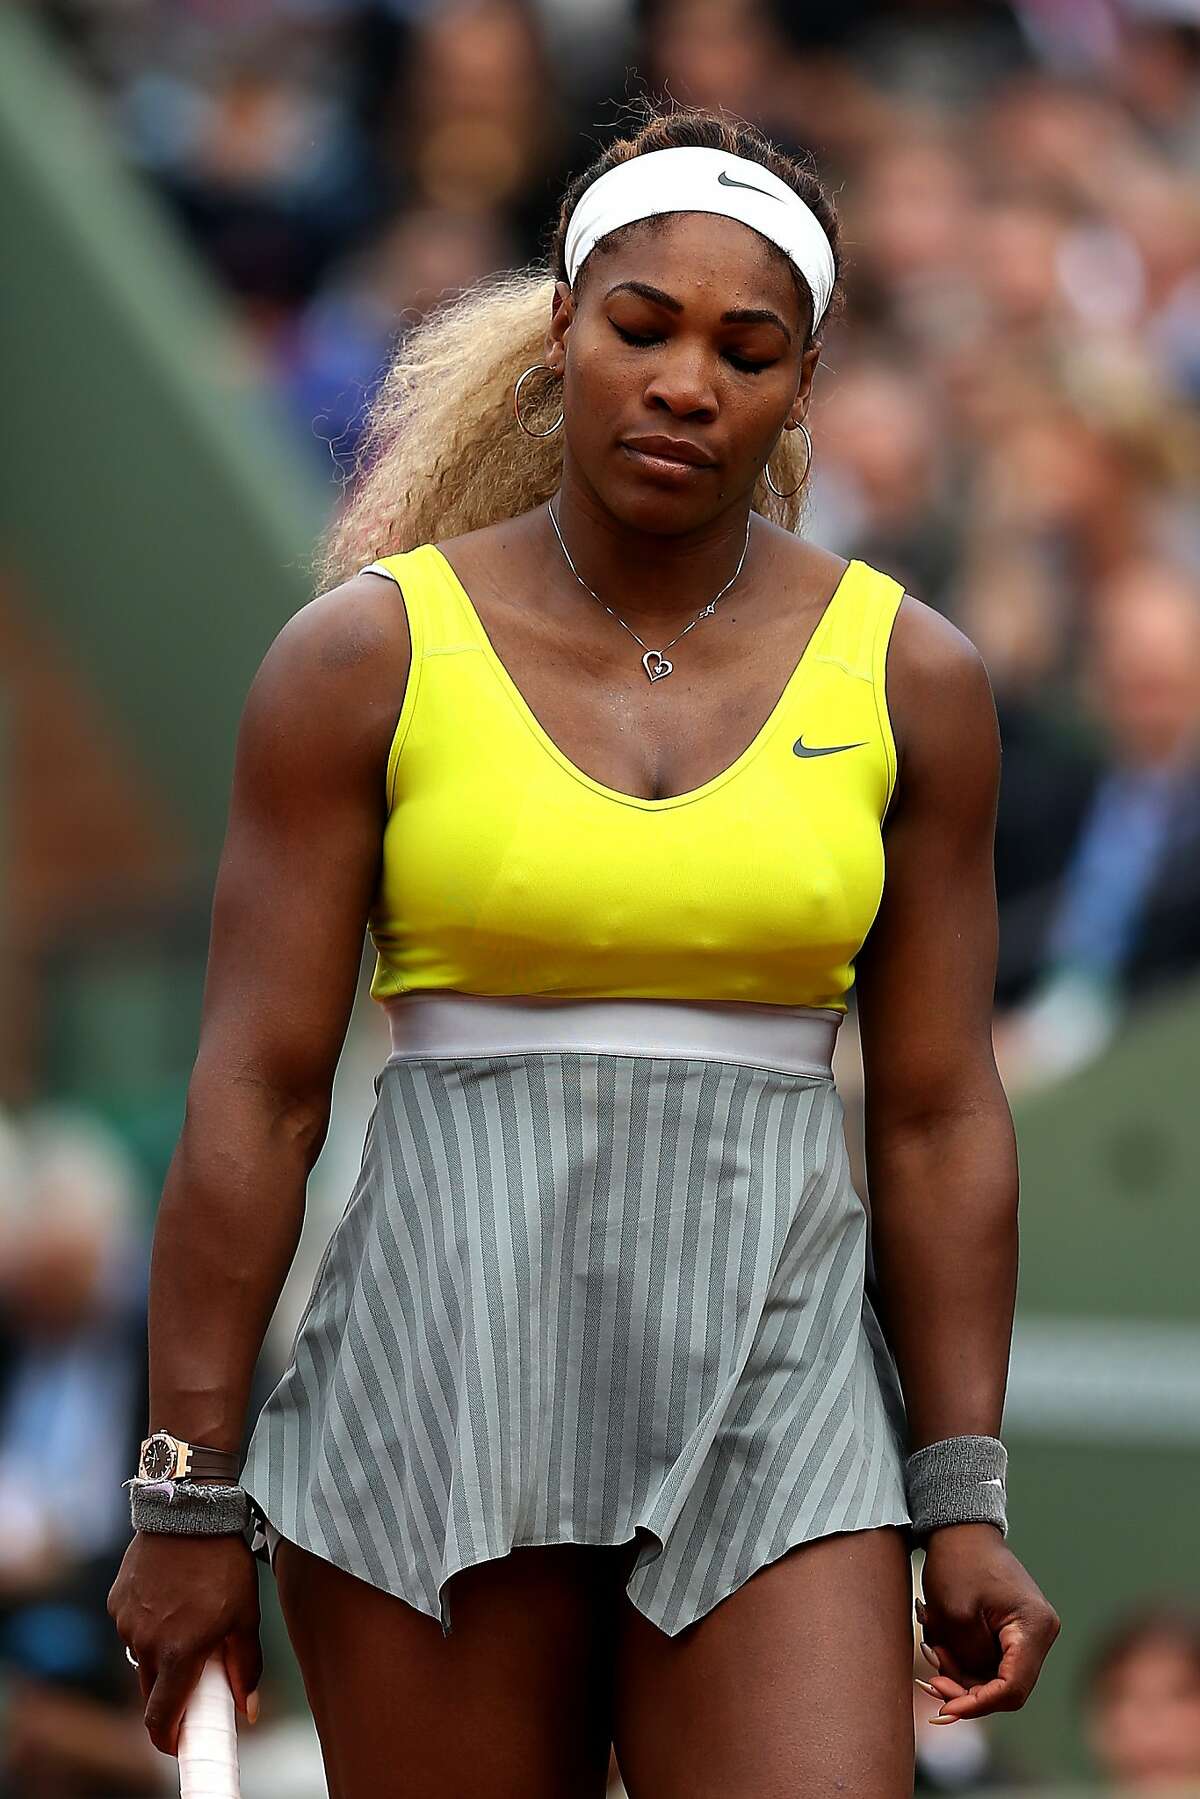 PARIS, FRANCE - MAY 28: Serena Williams of the United States reacts during her women's singles match against Garbine Muguruza of Spain on day four of the French Open at Roland Garros on May 28, 2014 in Paris, France. (Photo by Matthew Stockman/Getty Images)